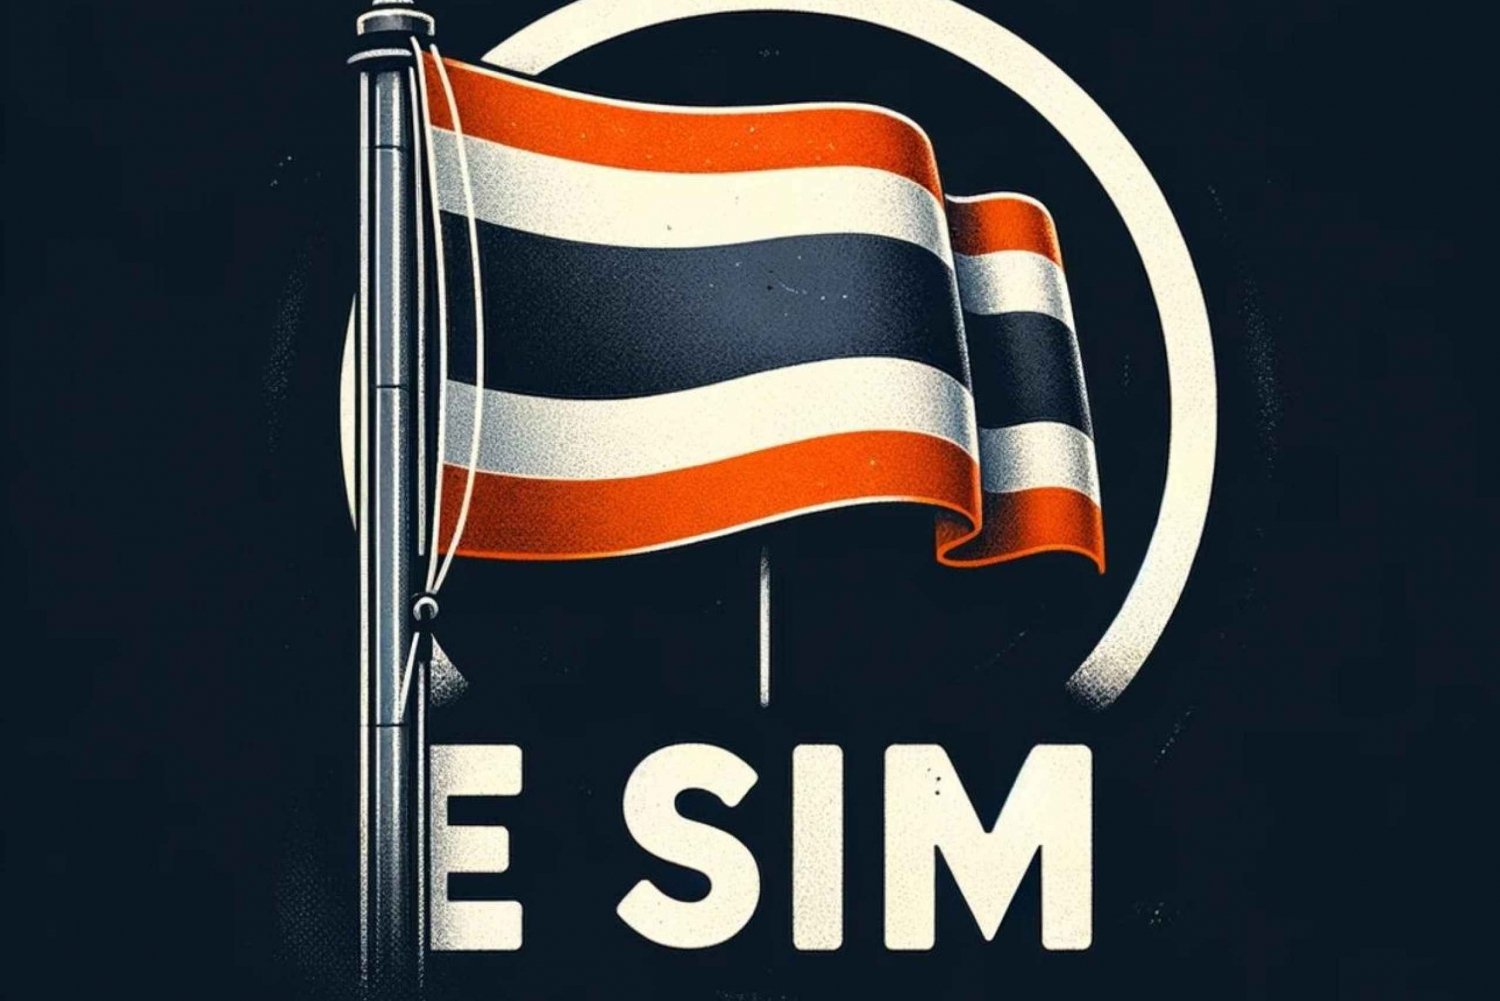 Thailand: eSIM with Unlimited Data Plans